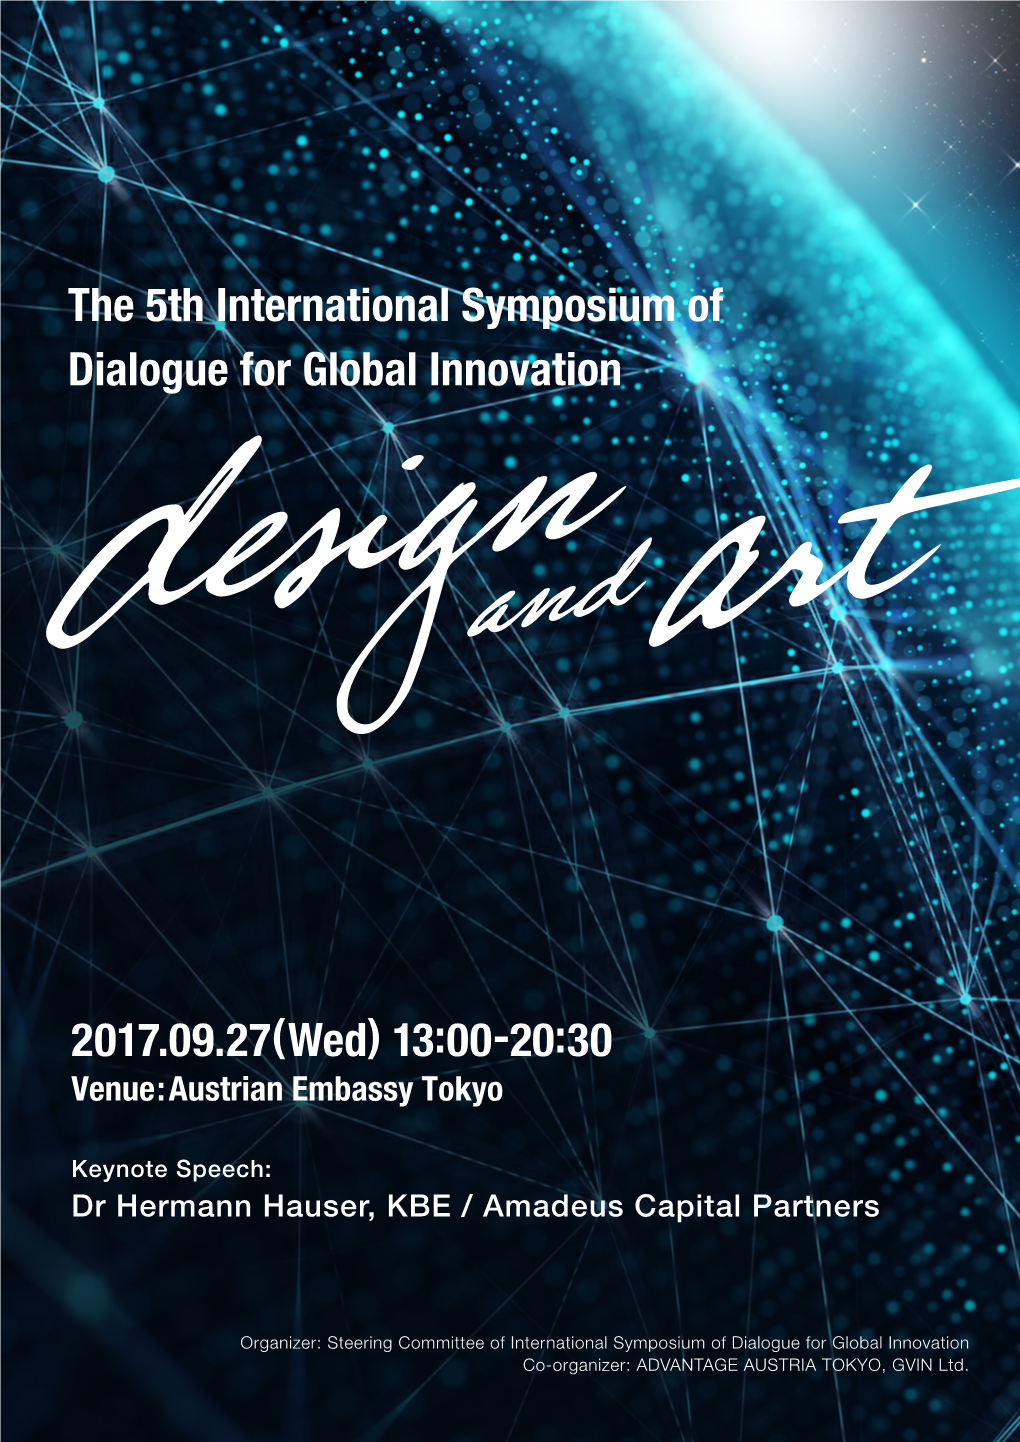 The 5Th International Symposium of Dialogue for Global Innovation